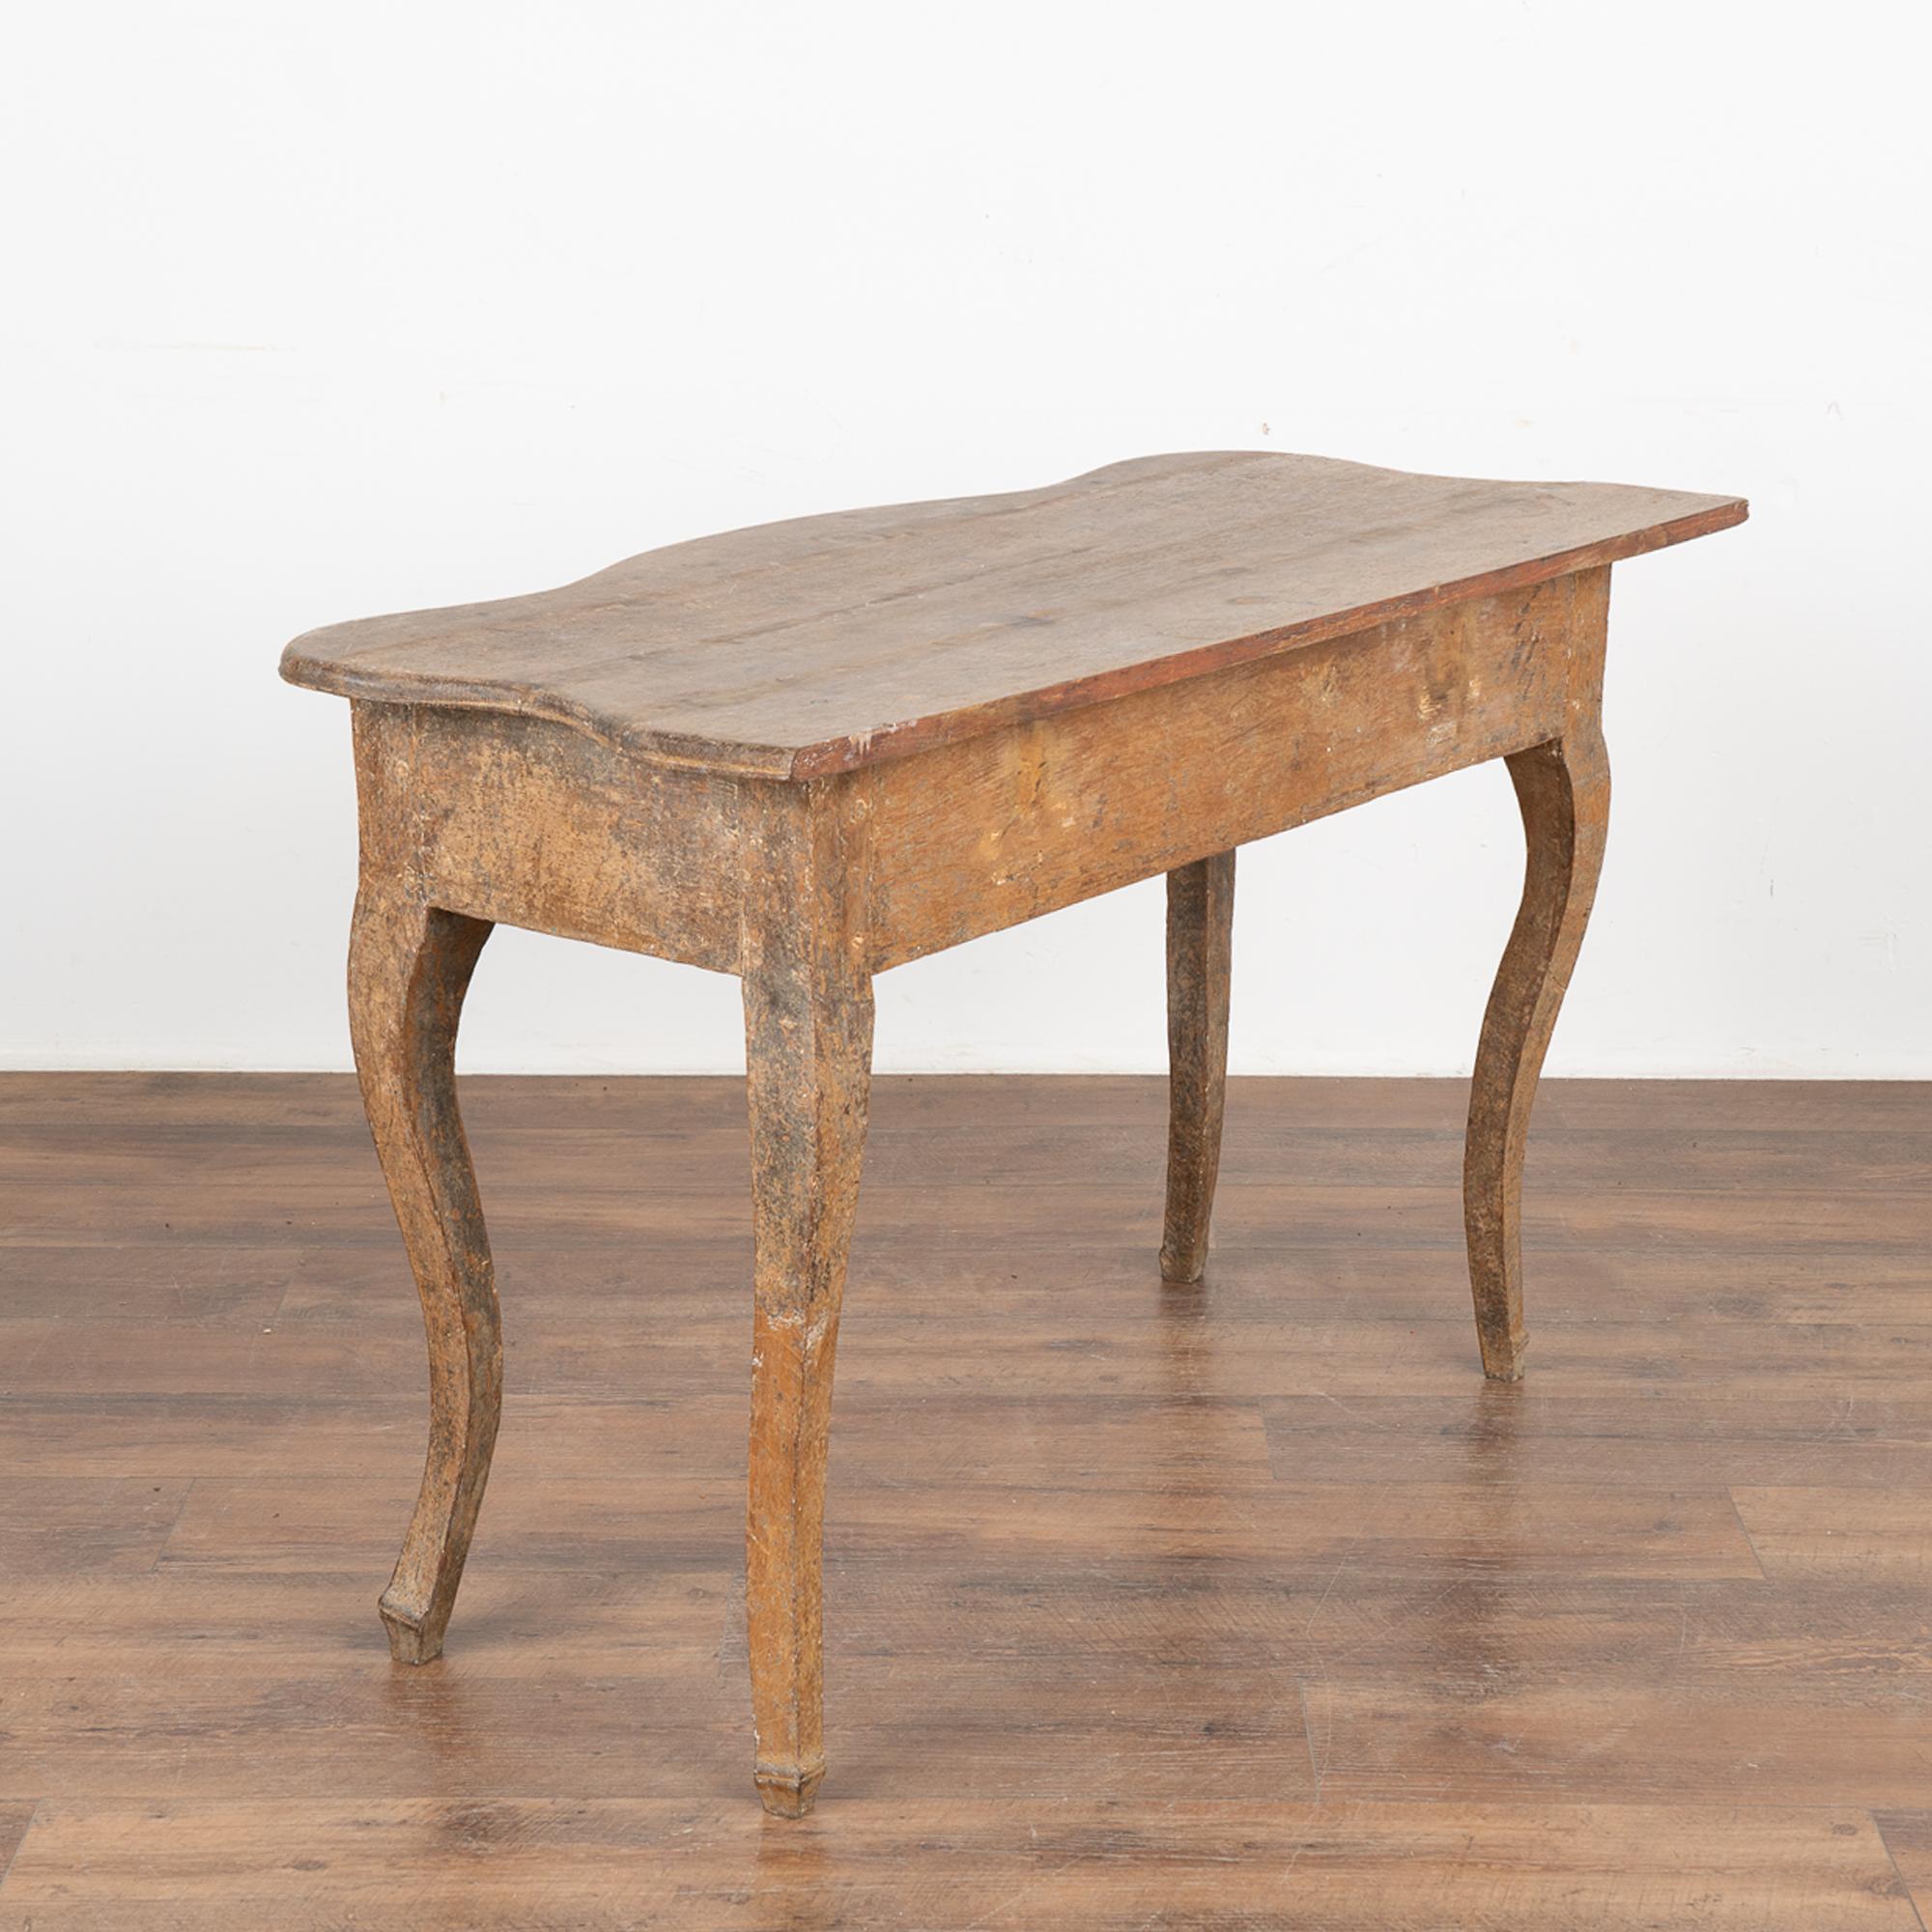 Antique Rococo Pine Side Table with Drawer, Sweden circa 1770-80 For Sale 4